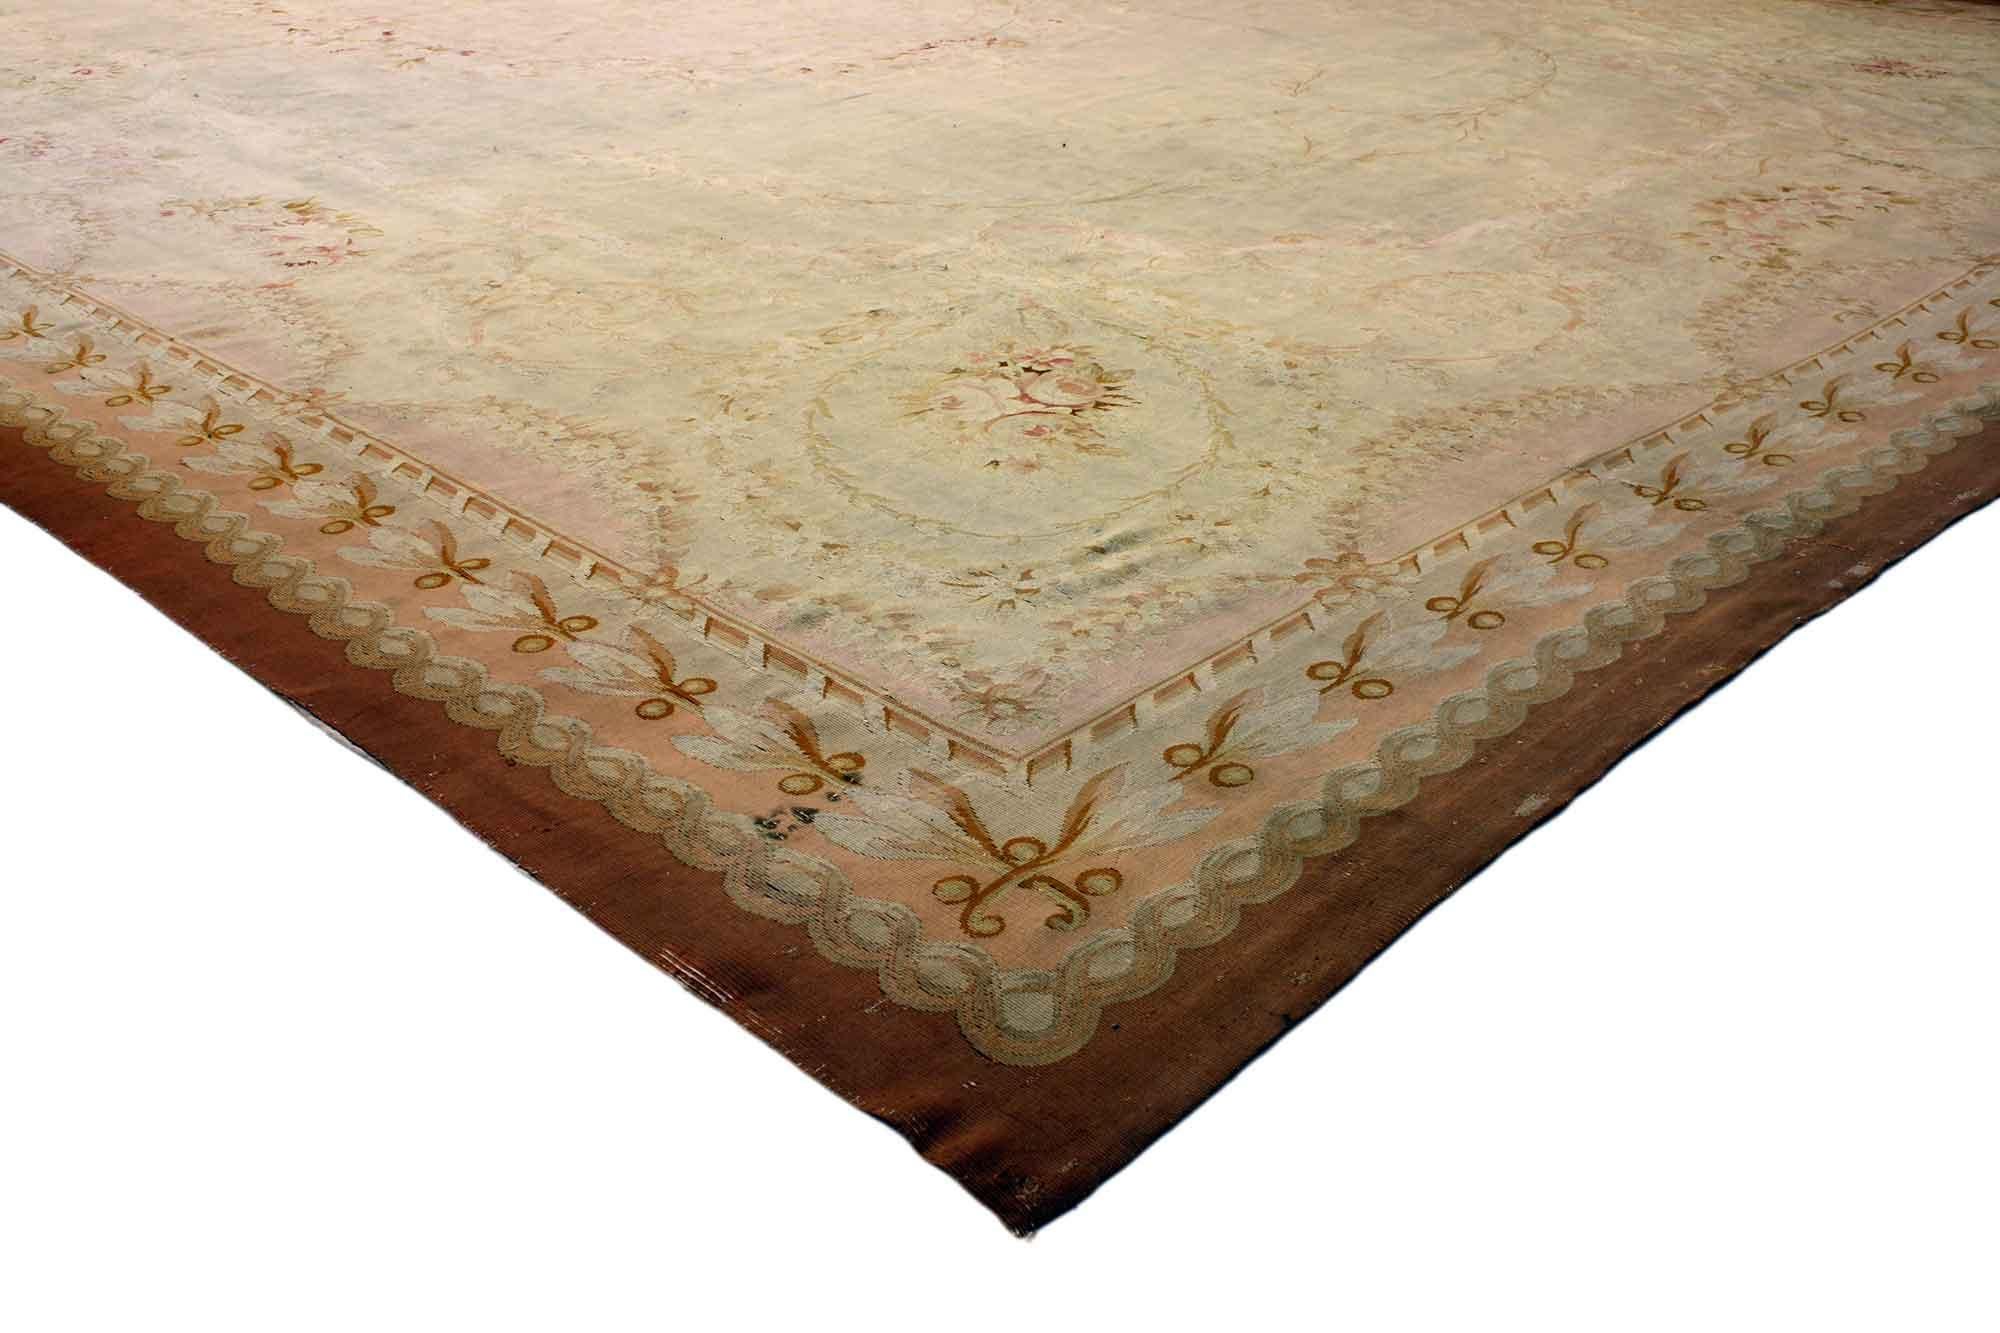 76845 late 19th century antique French Aubusson rug with Romantic Rococo Style. With bountiful Aubusson roses and French Provincial style, this Late 19th Century Antique French Aubusson palace rug was spared no expense. A decorative centre medallion